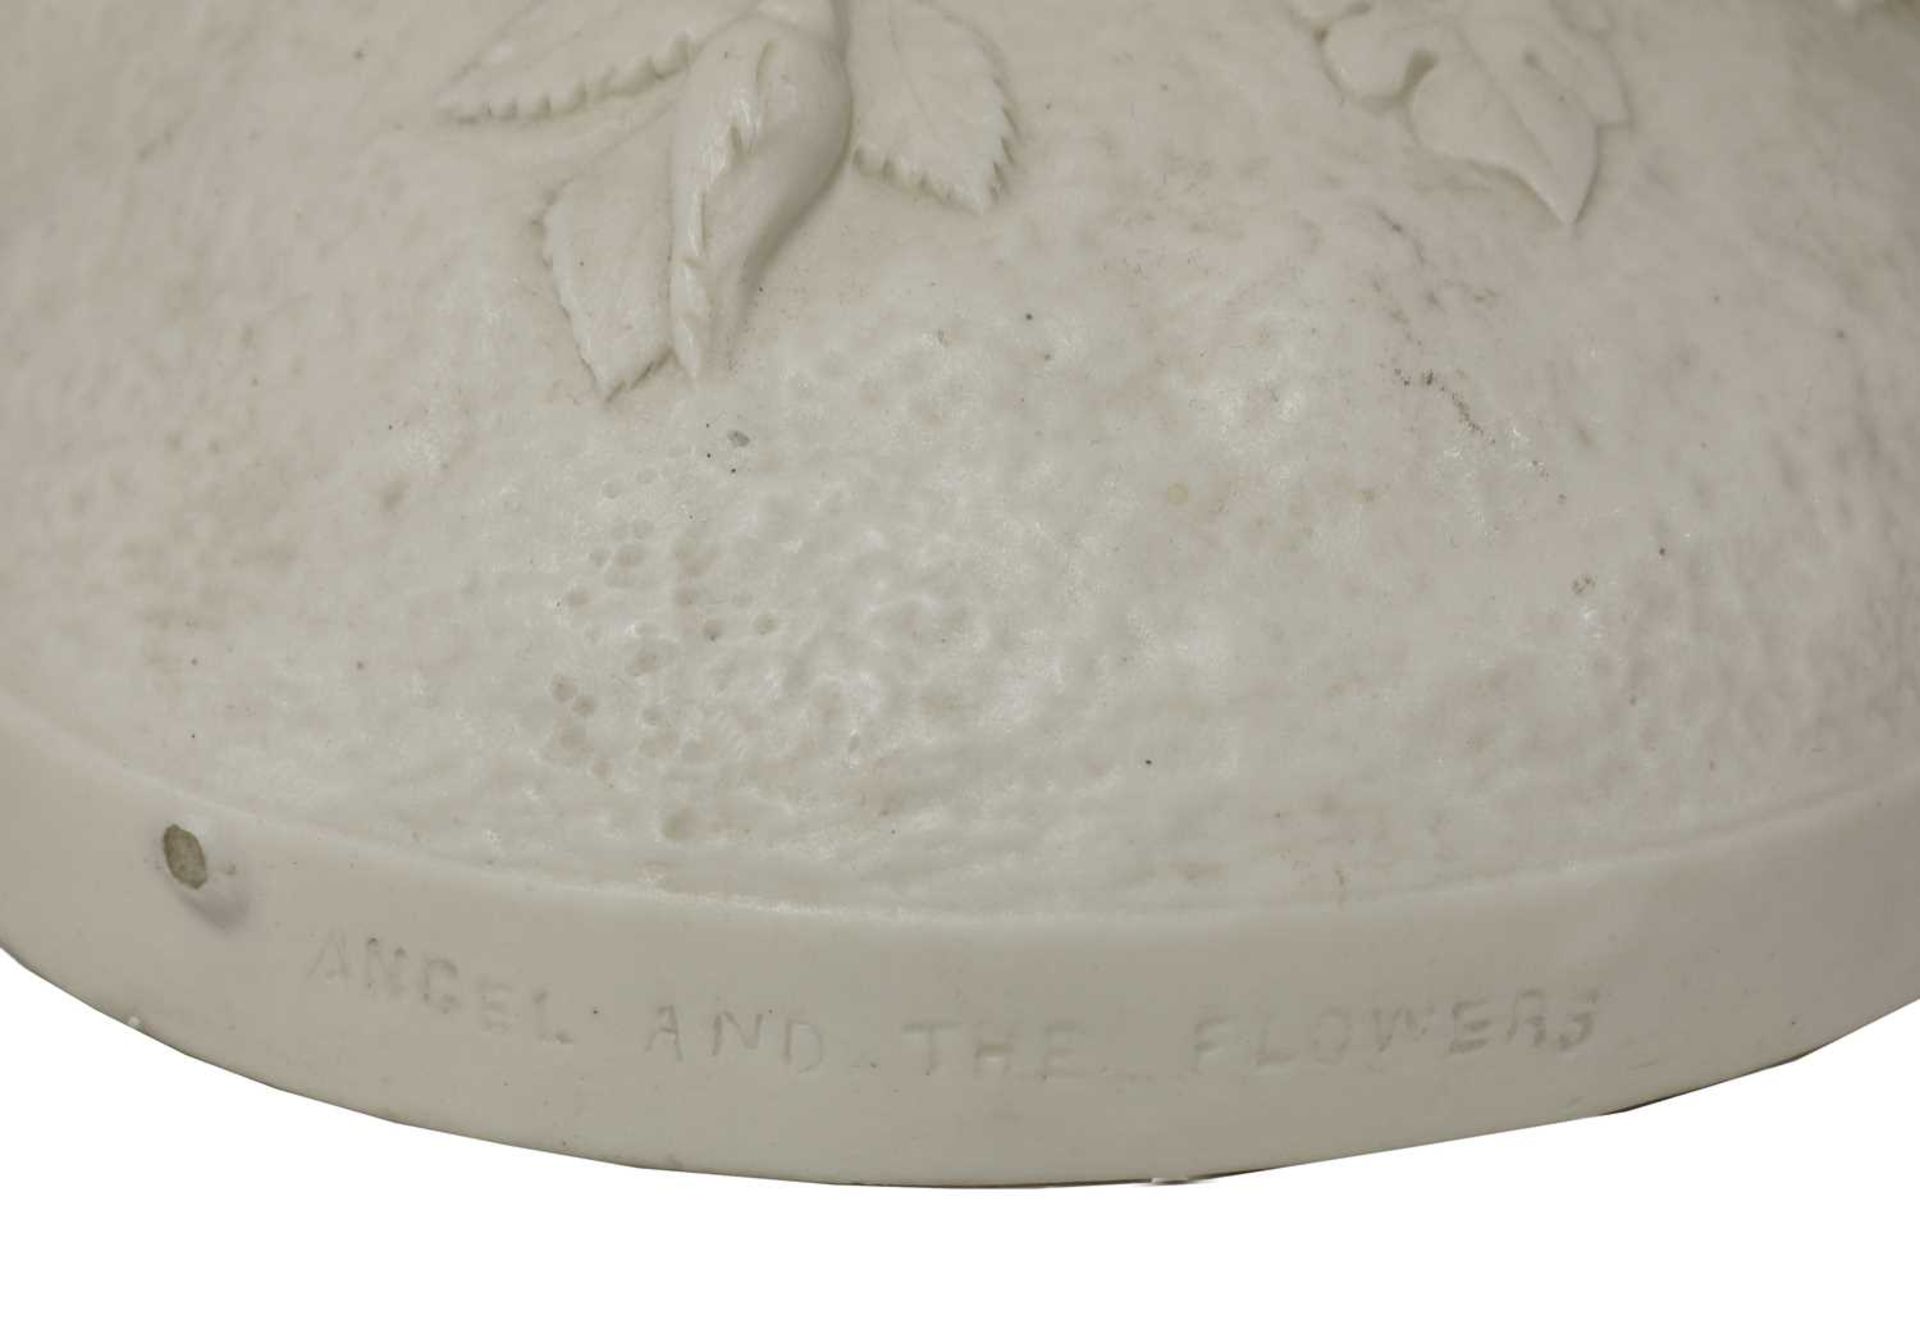 A Copeland Parianware oil lamp 'The angel and the flowers', - Image 7 of 7